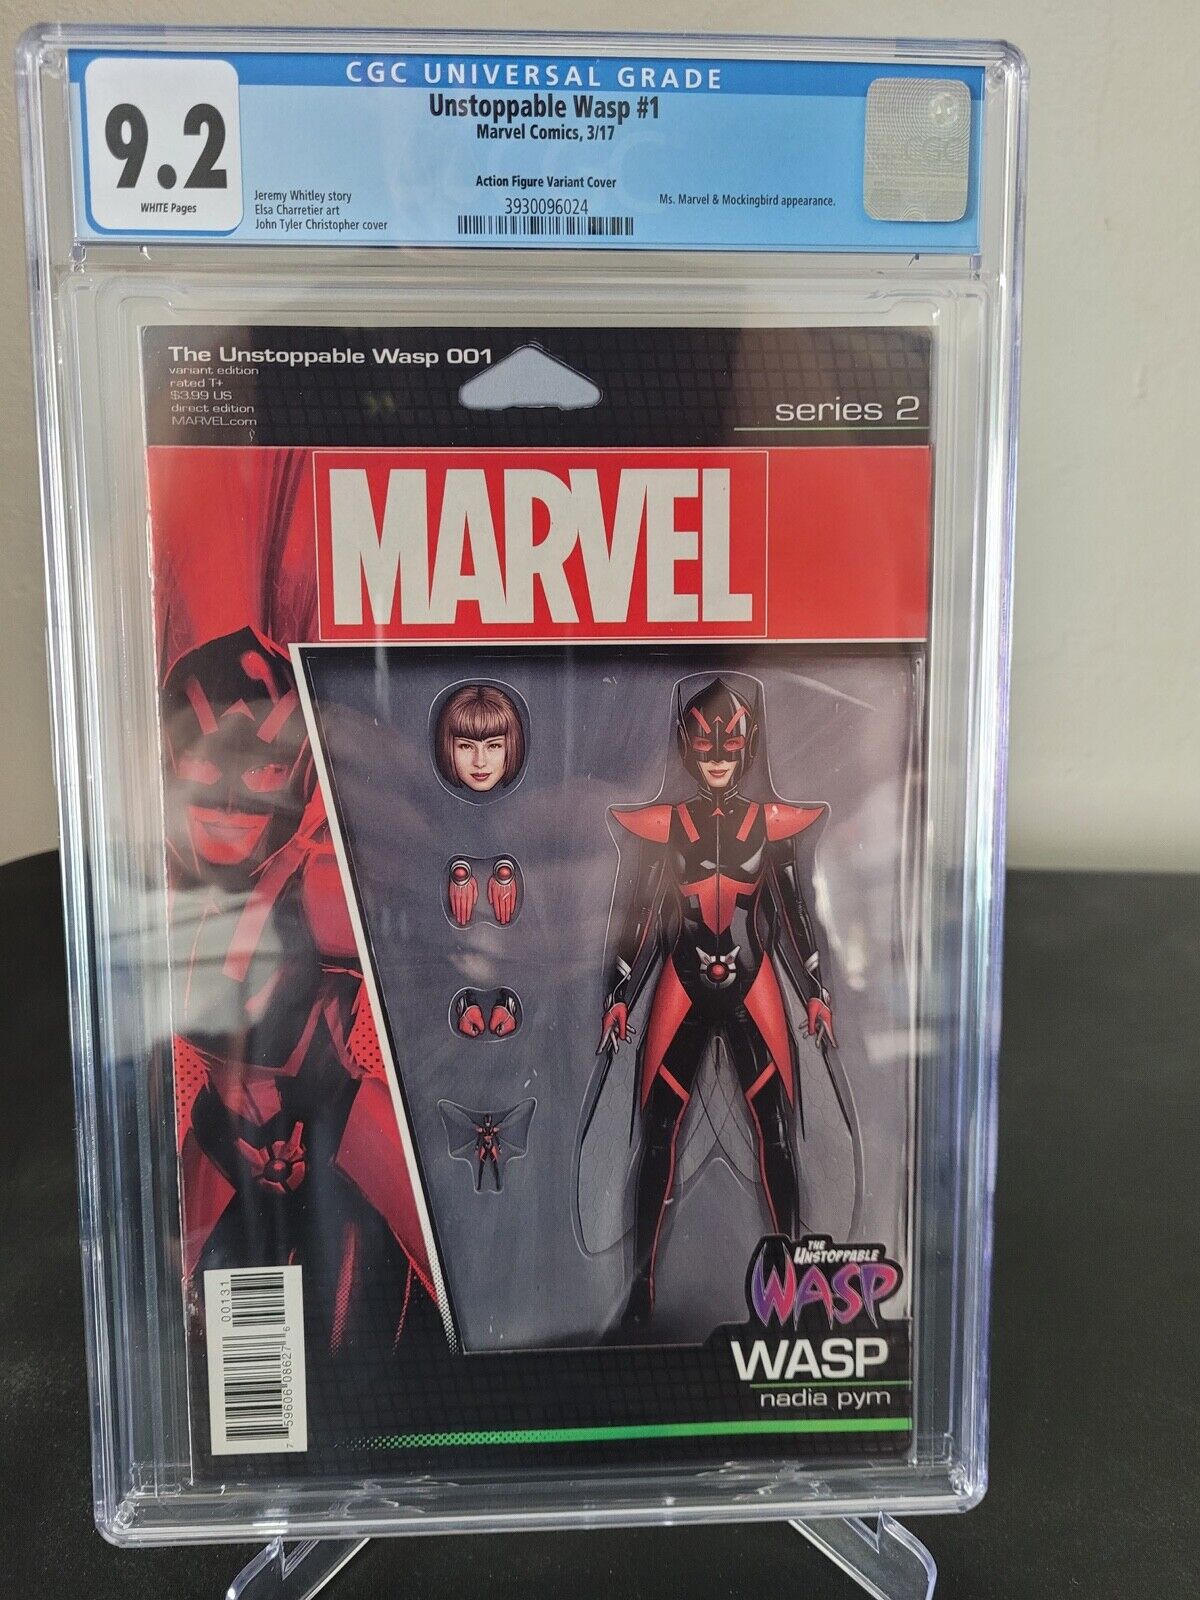 UNSTOPPABLE WASP #1 CGC 9.2 GRADED MARVEL COMICS ACTION FIGURE VARIANT COVER